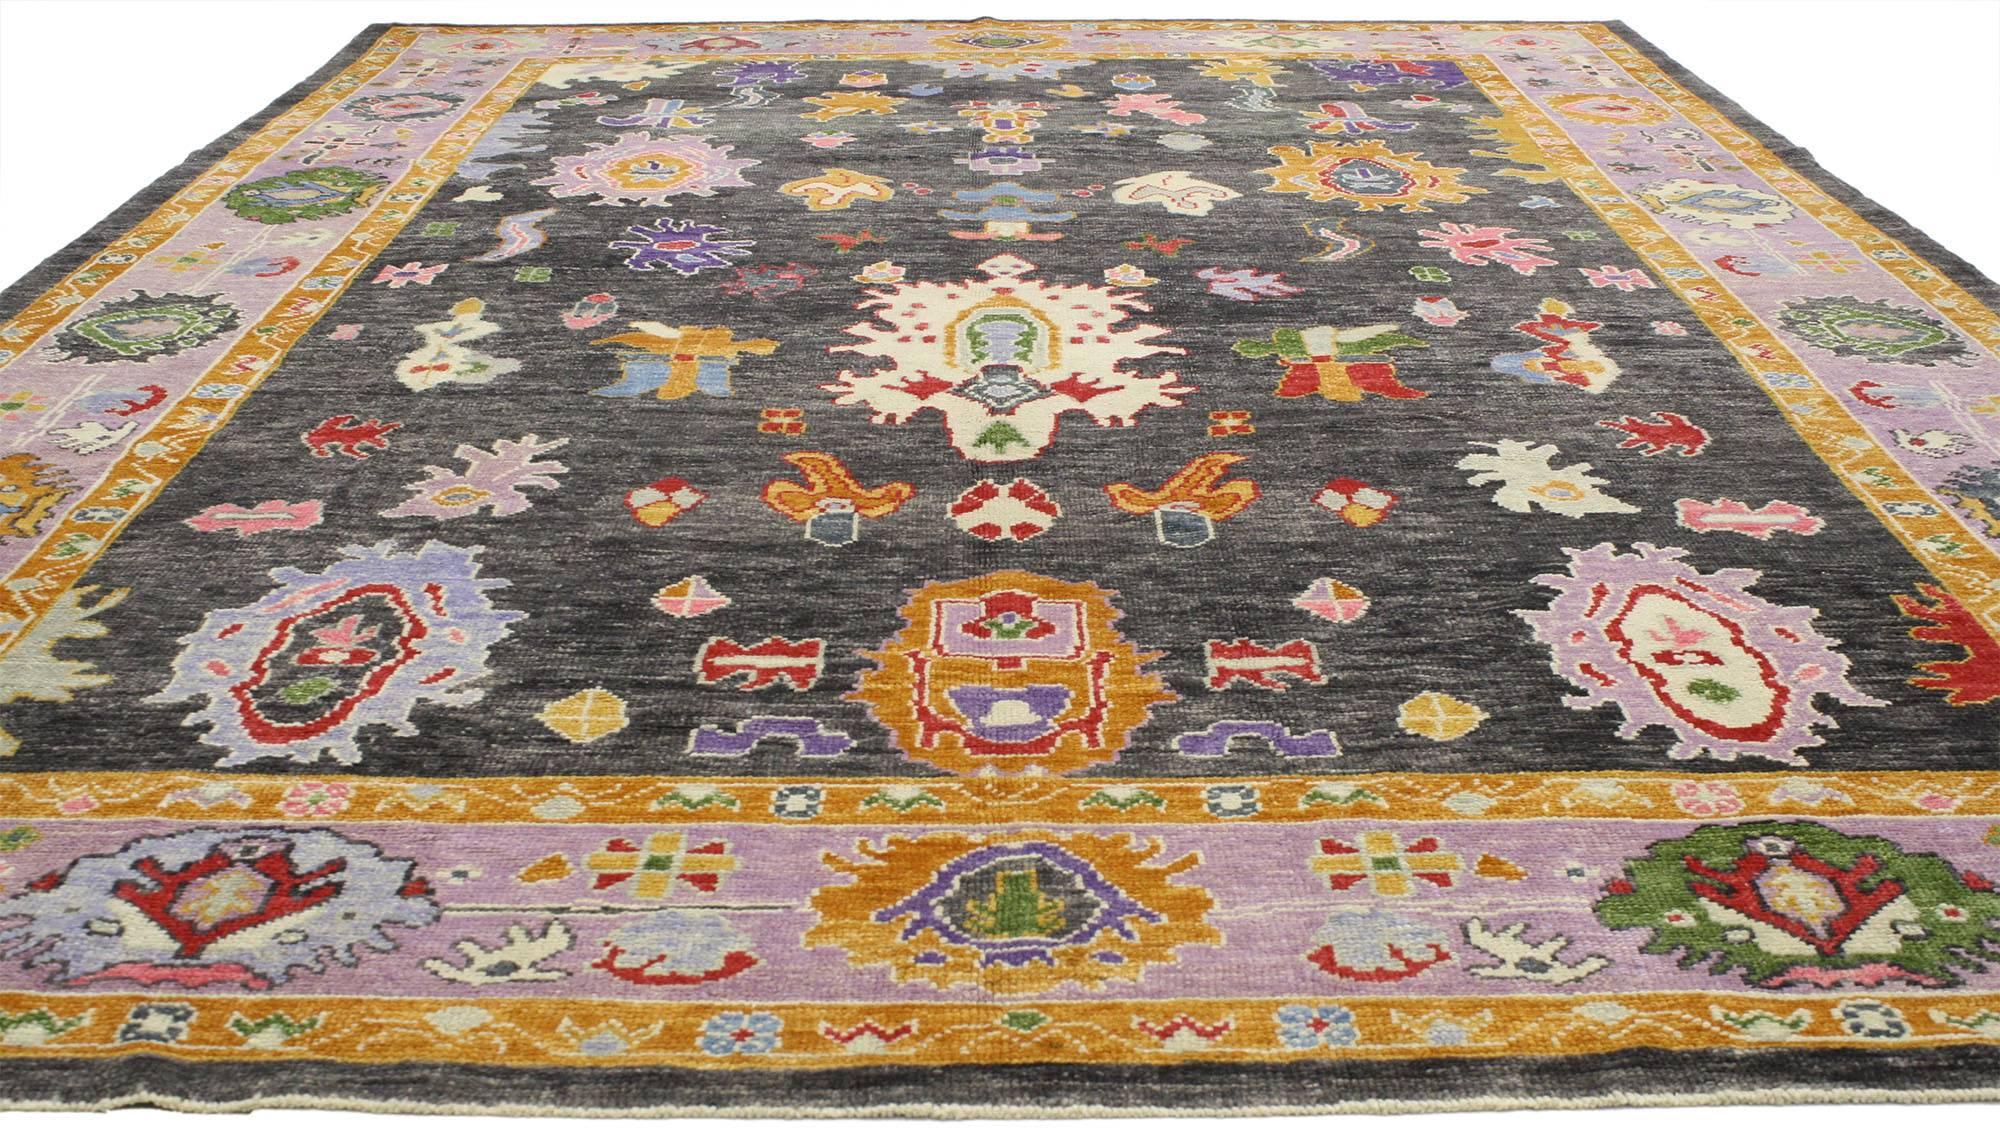 52233, contemporary Turkish Oushak rug with modern style. Infuse your home with personality by celebrating your unique style with this contemporary Turkish Oushak rug. This beautifully detailed Oushak rug keeps the eyes entertained, yet it’s